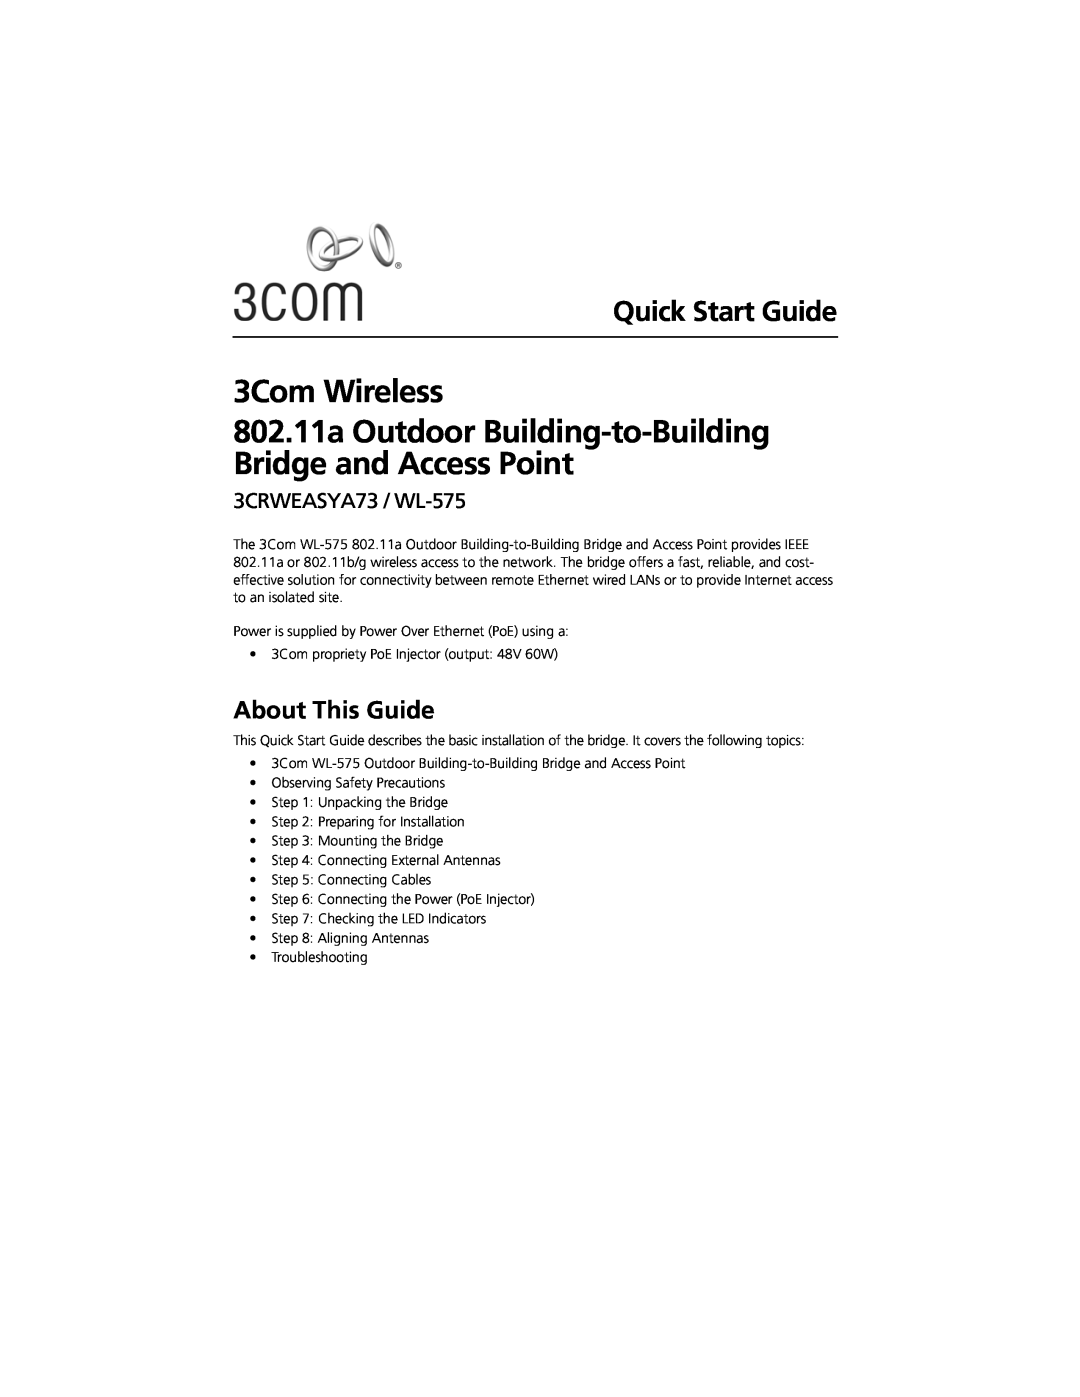 3Com 3CRWEASYA73 quick start About This Guide, 3Com Wireless 802.11a Outdoor Building-to-Building, Bridge and Access Point 